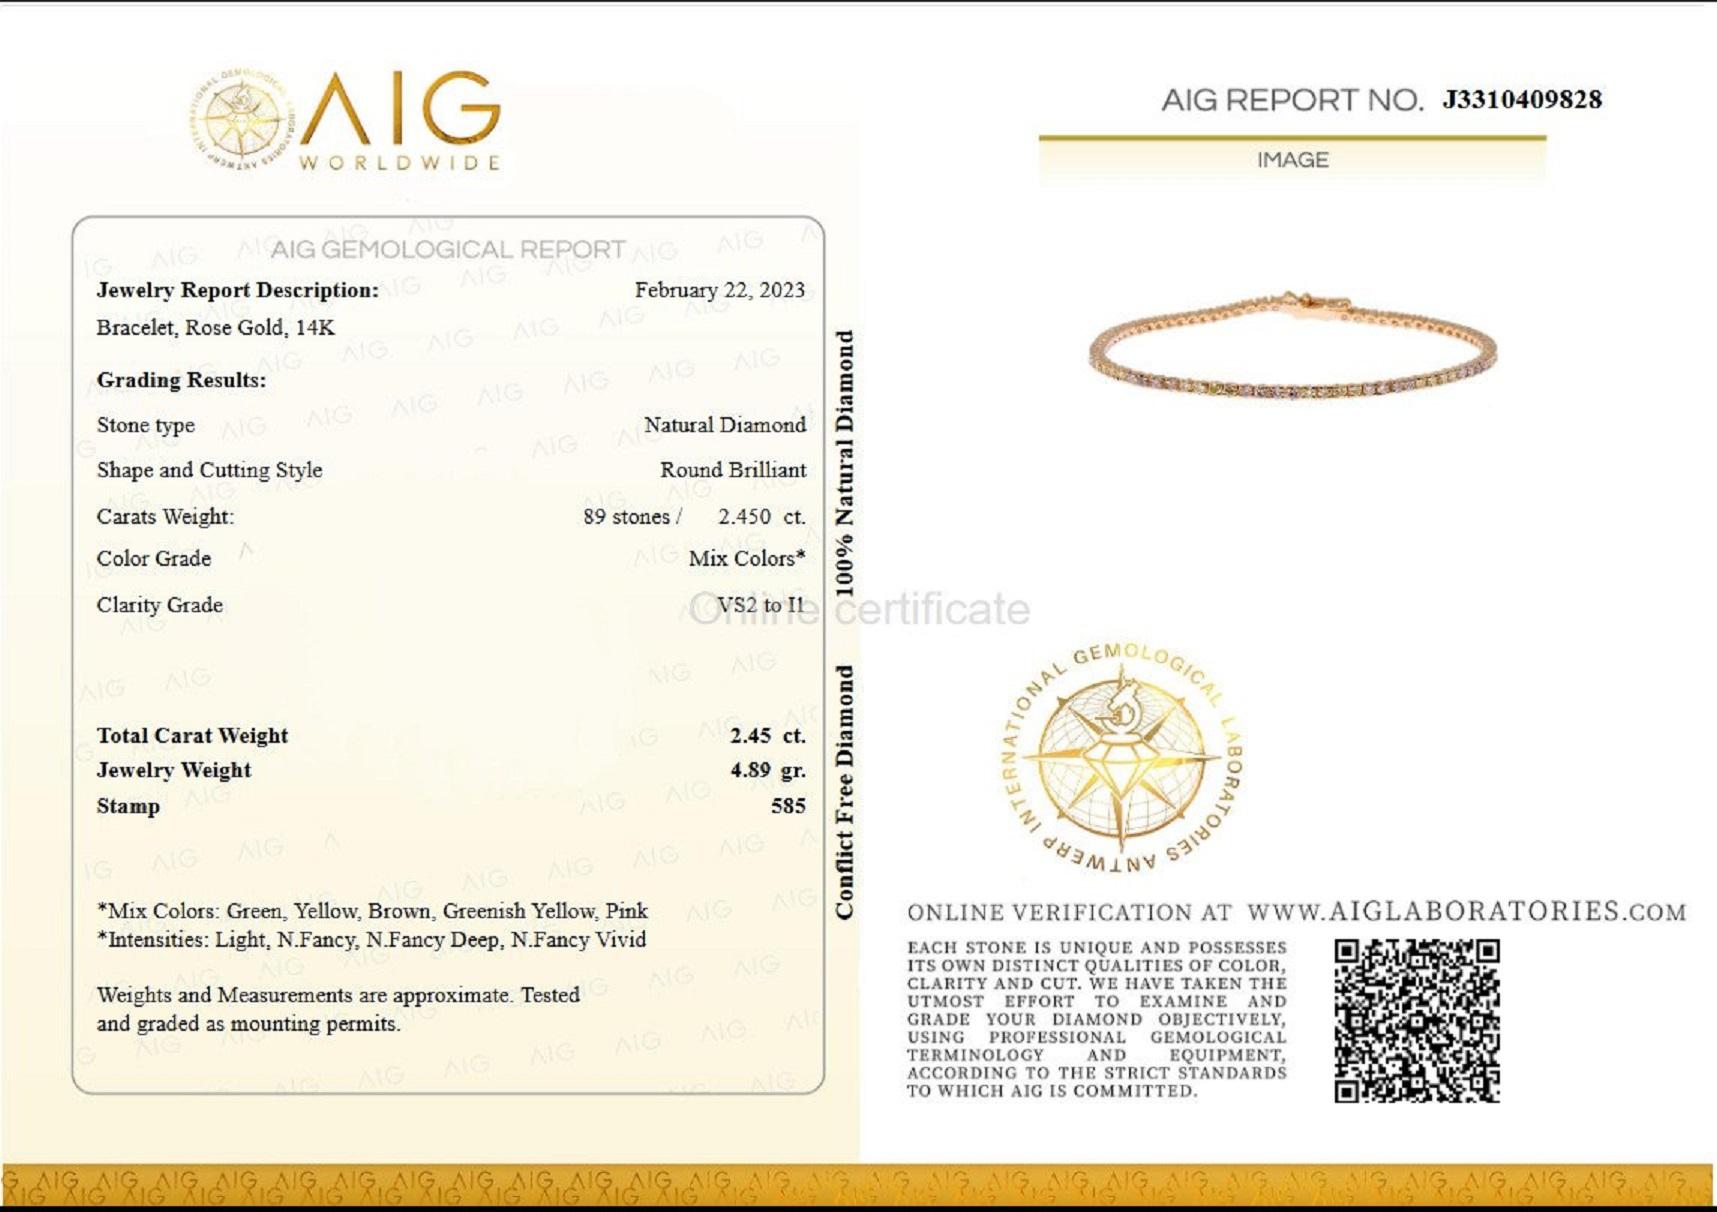 No customs fees in US or HK.
___________
Natural Diamonds
Cut: Round Brilliant
Carat: 2.45 cttw / 89 stones
Color: Mix Colors
Clarity: VS2 to I1

Item ships from Israeli Diamonds Exchange, customers are responsible for any local customs or VAT fees